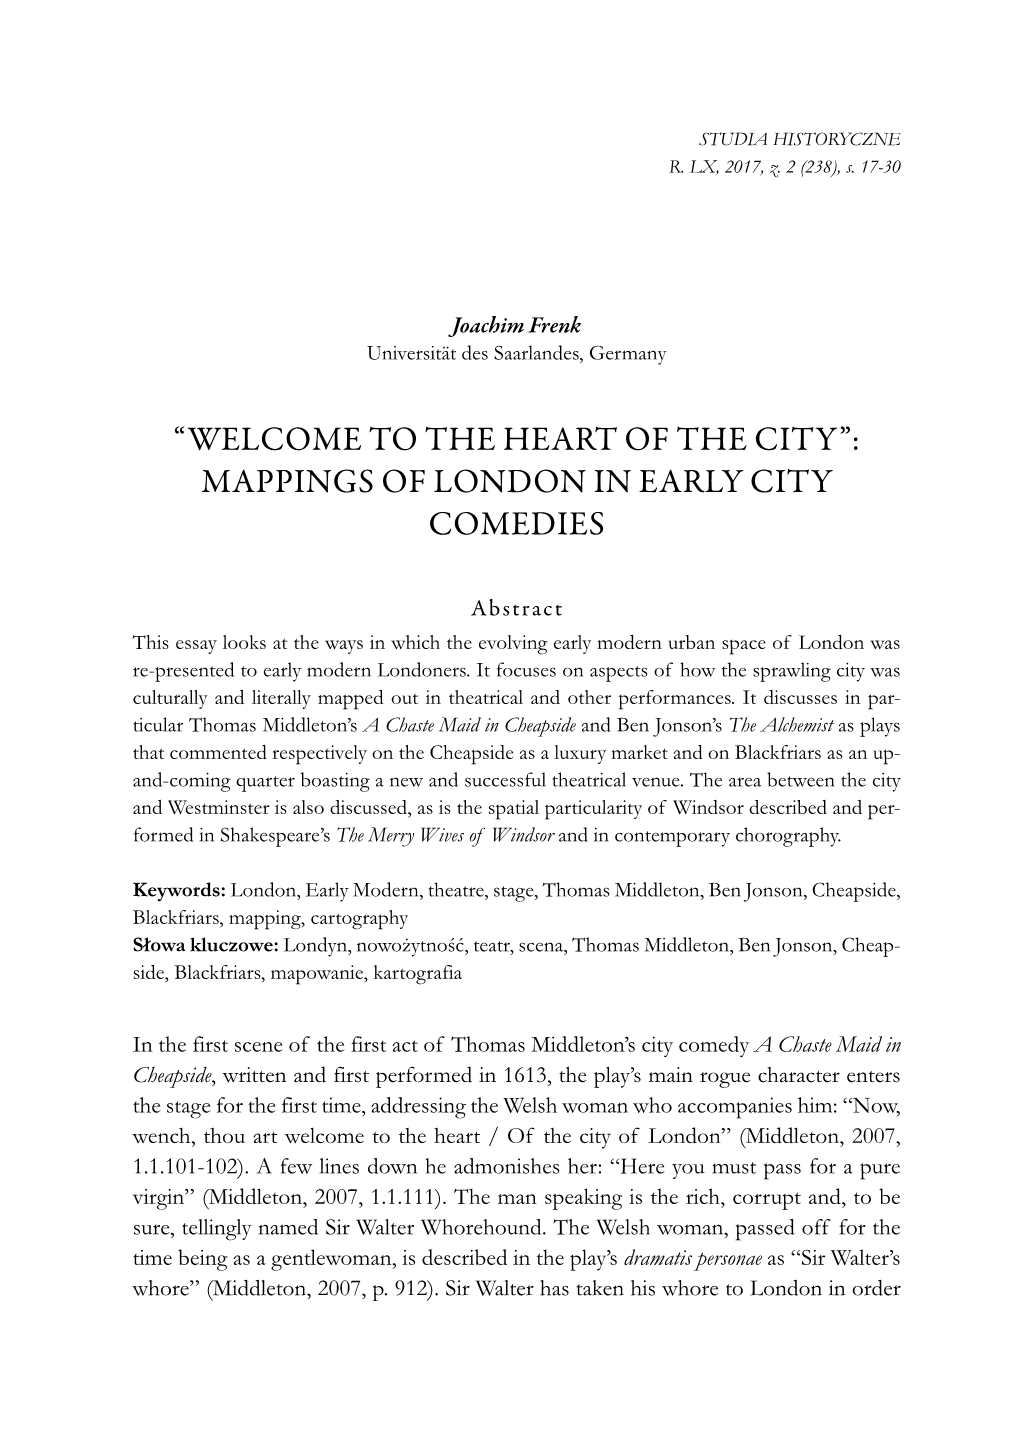 The Heart of the City”: Mappings of London in Early City Comedies